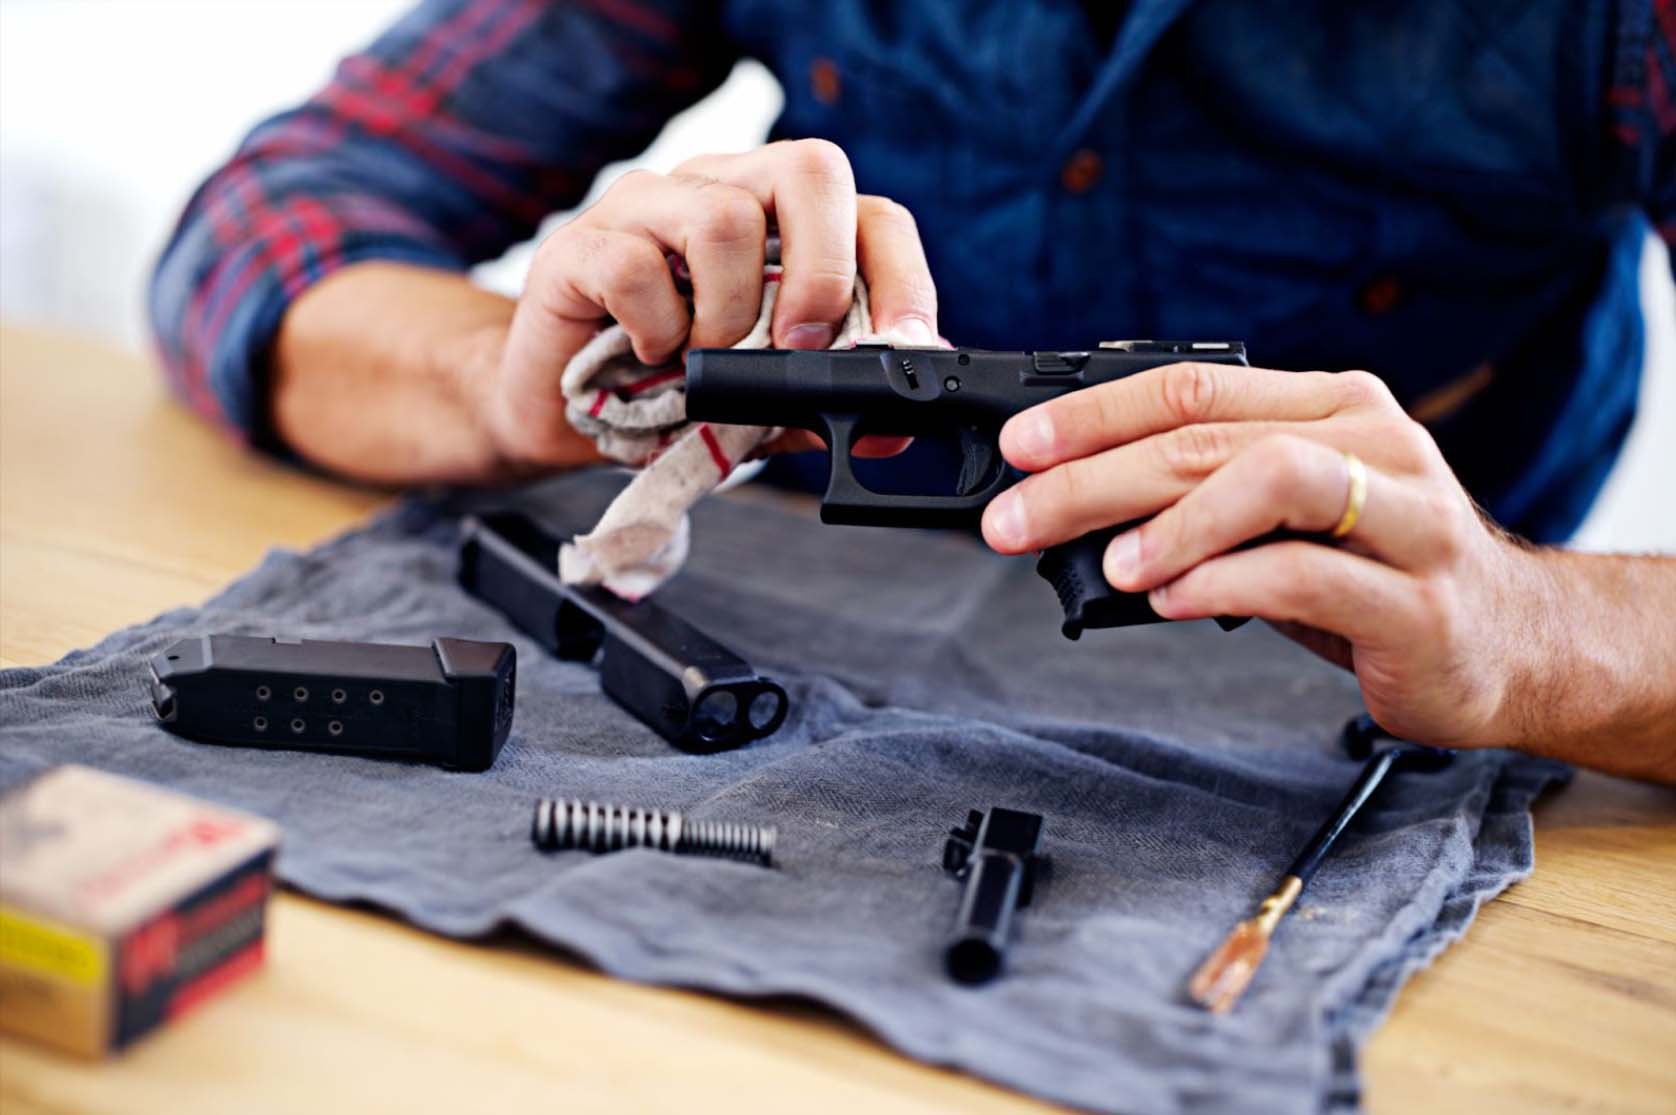 Regular maintenance is essential for every gun owner, as depicted by the cropped view of a man cleaning his gun.